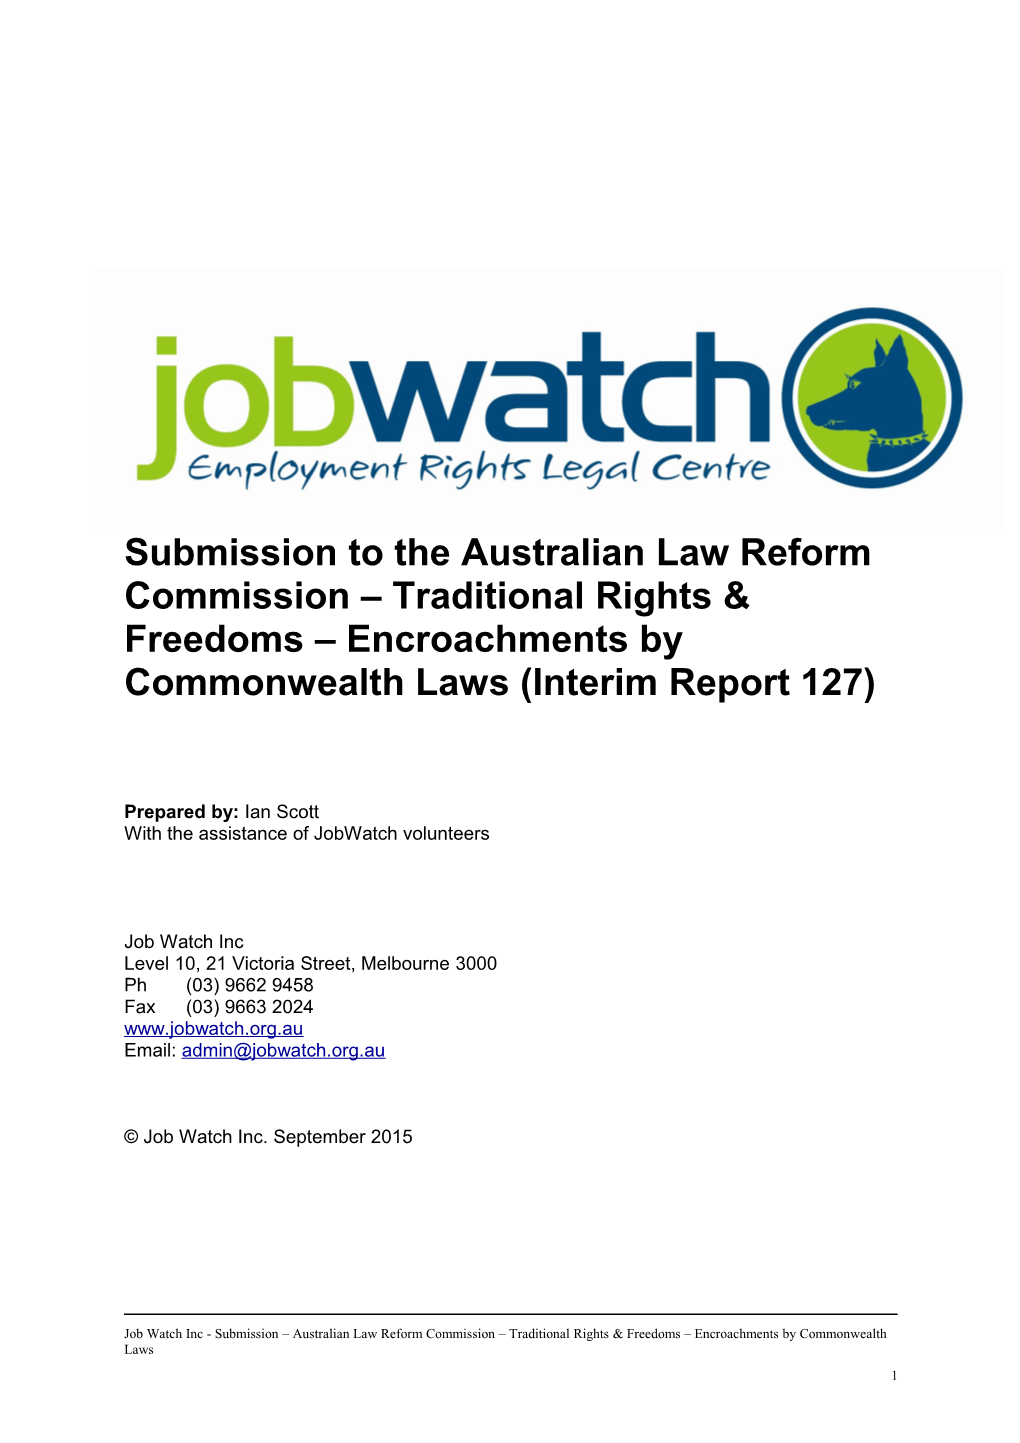 In This Submission, Jobwatch Would Like to Reiterate Our Previously Submitted Points And